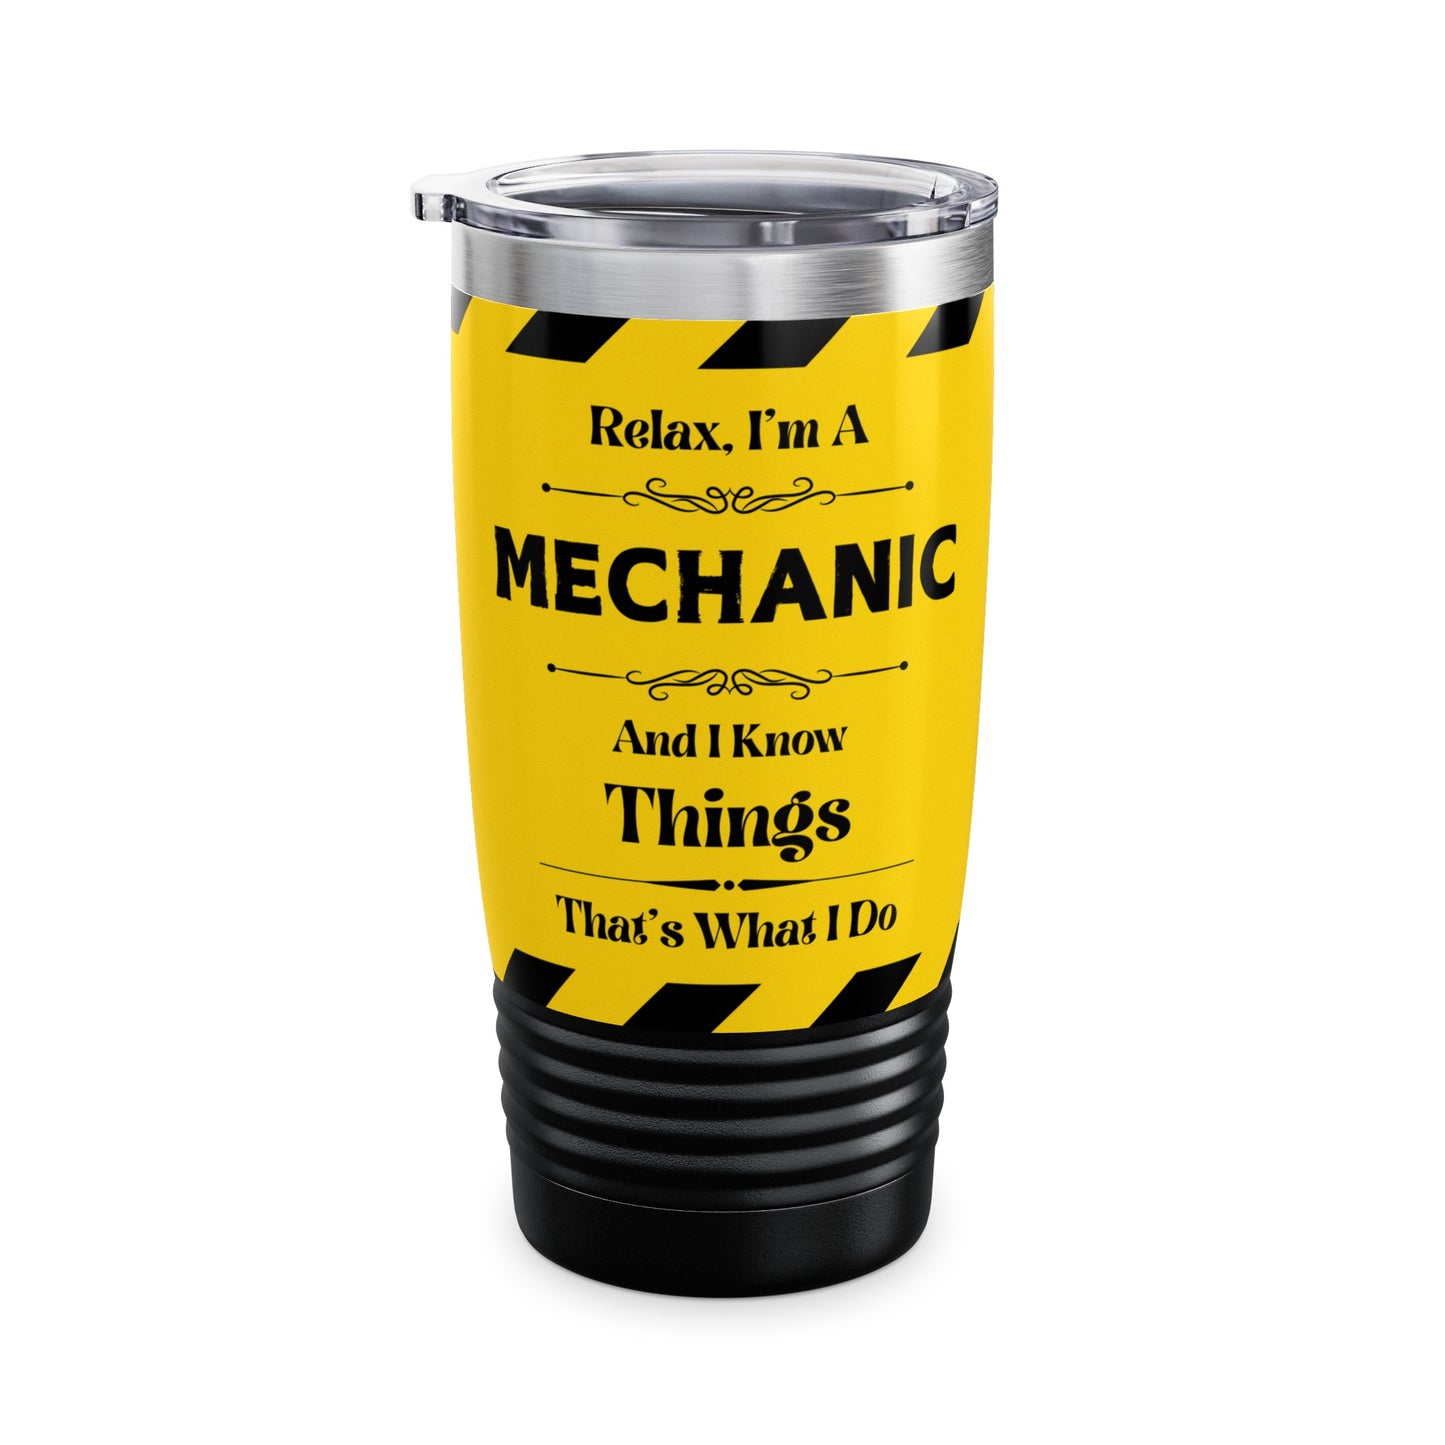 Relax, I'm A MECHANIC, And I Know Things - Ringneck Tumbler, 20oz